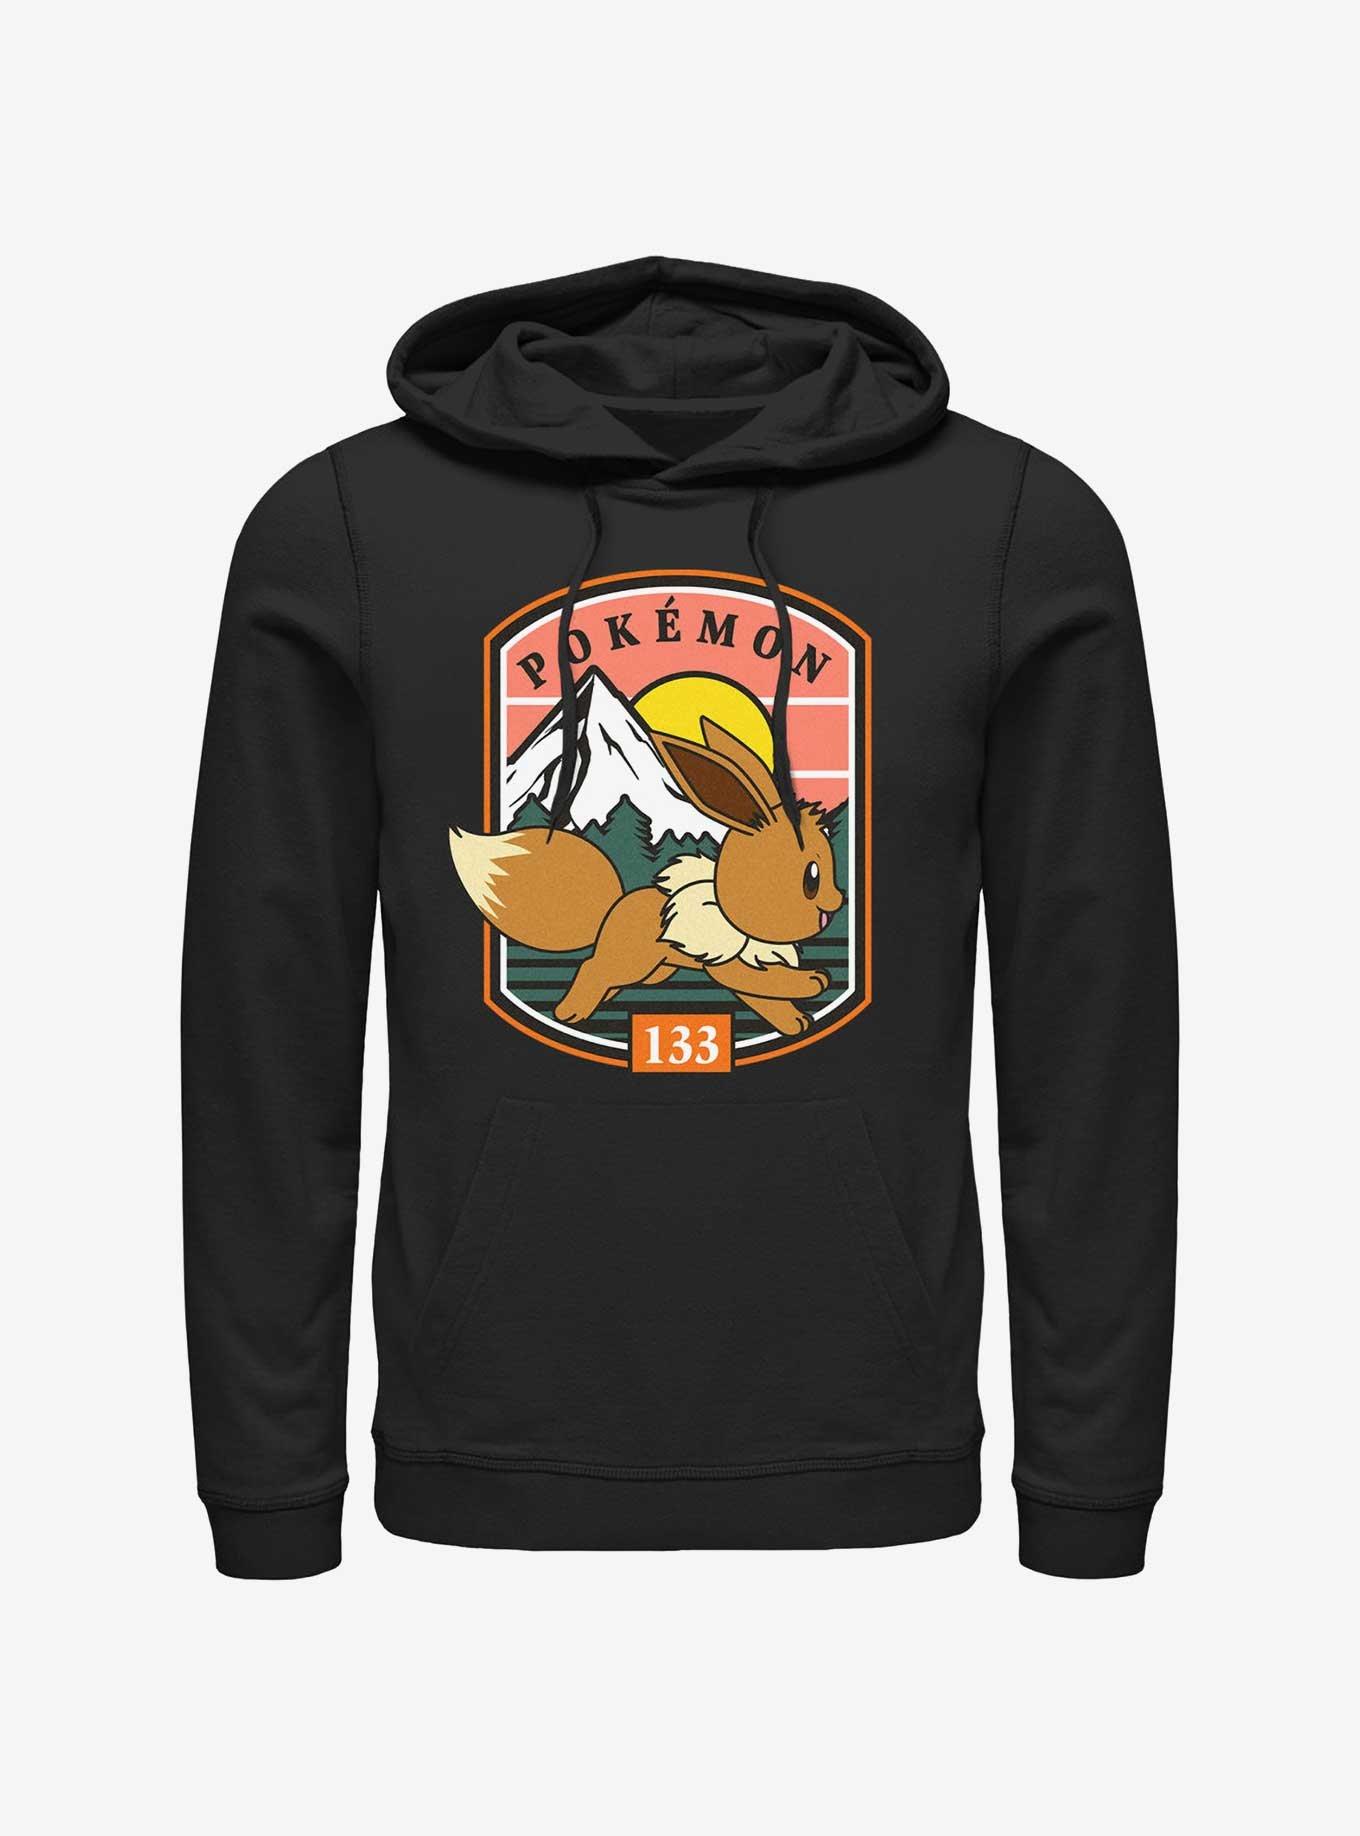 Pokemon all about Eevee characters shirt, hoodie, sweater, long sleeve and  tank top